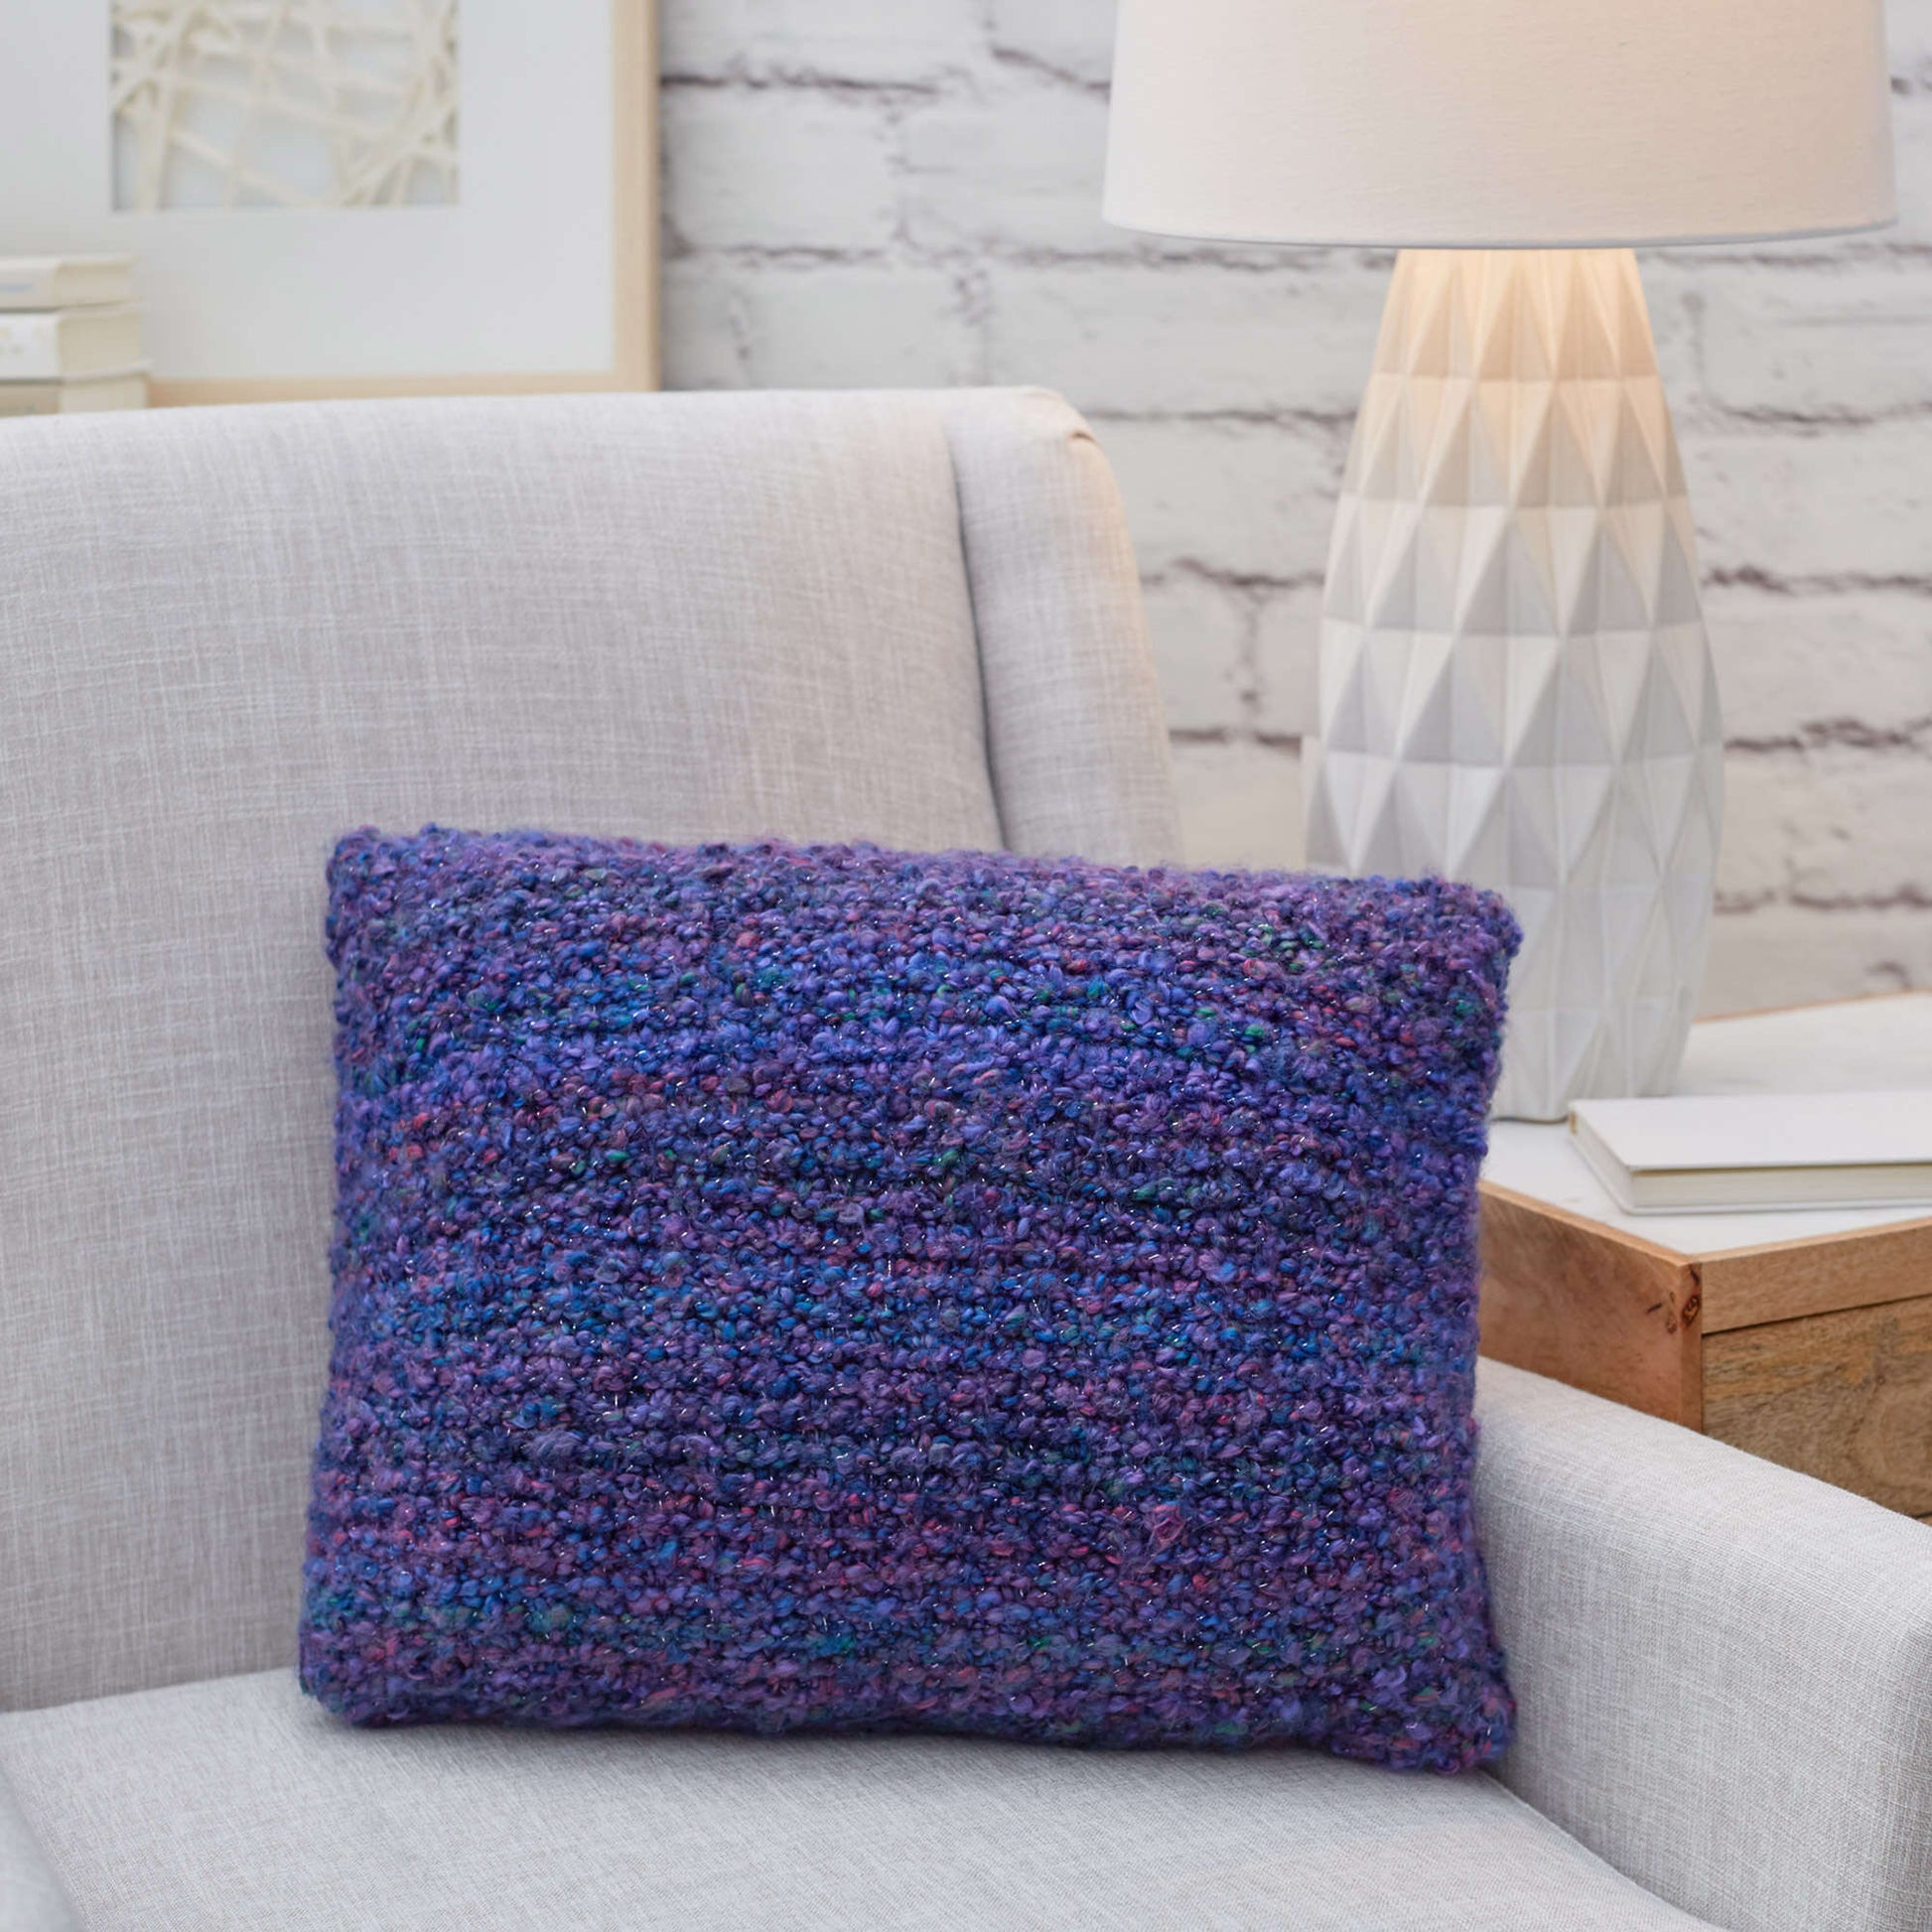 Free Red Heart Simple Knit Pillow Pattern